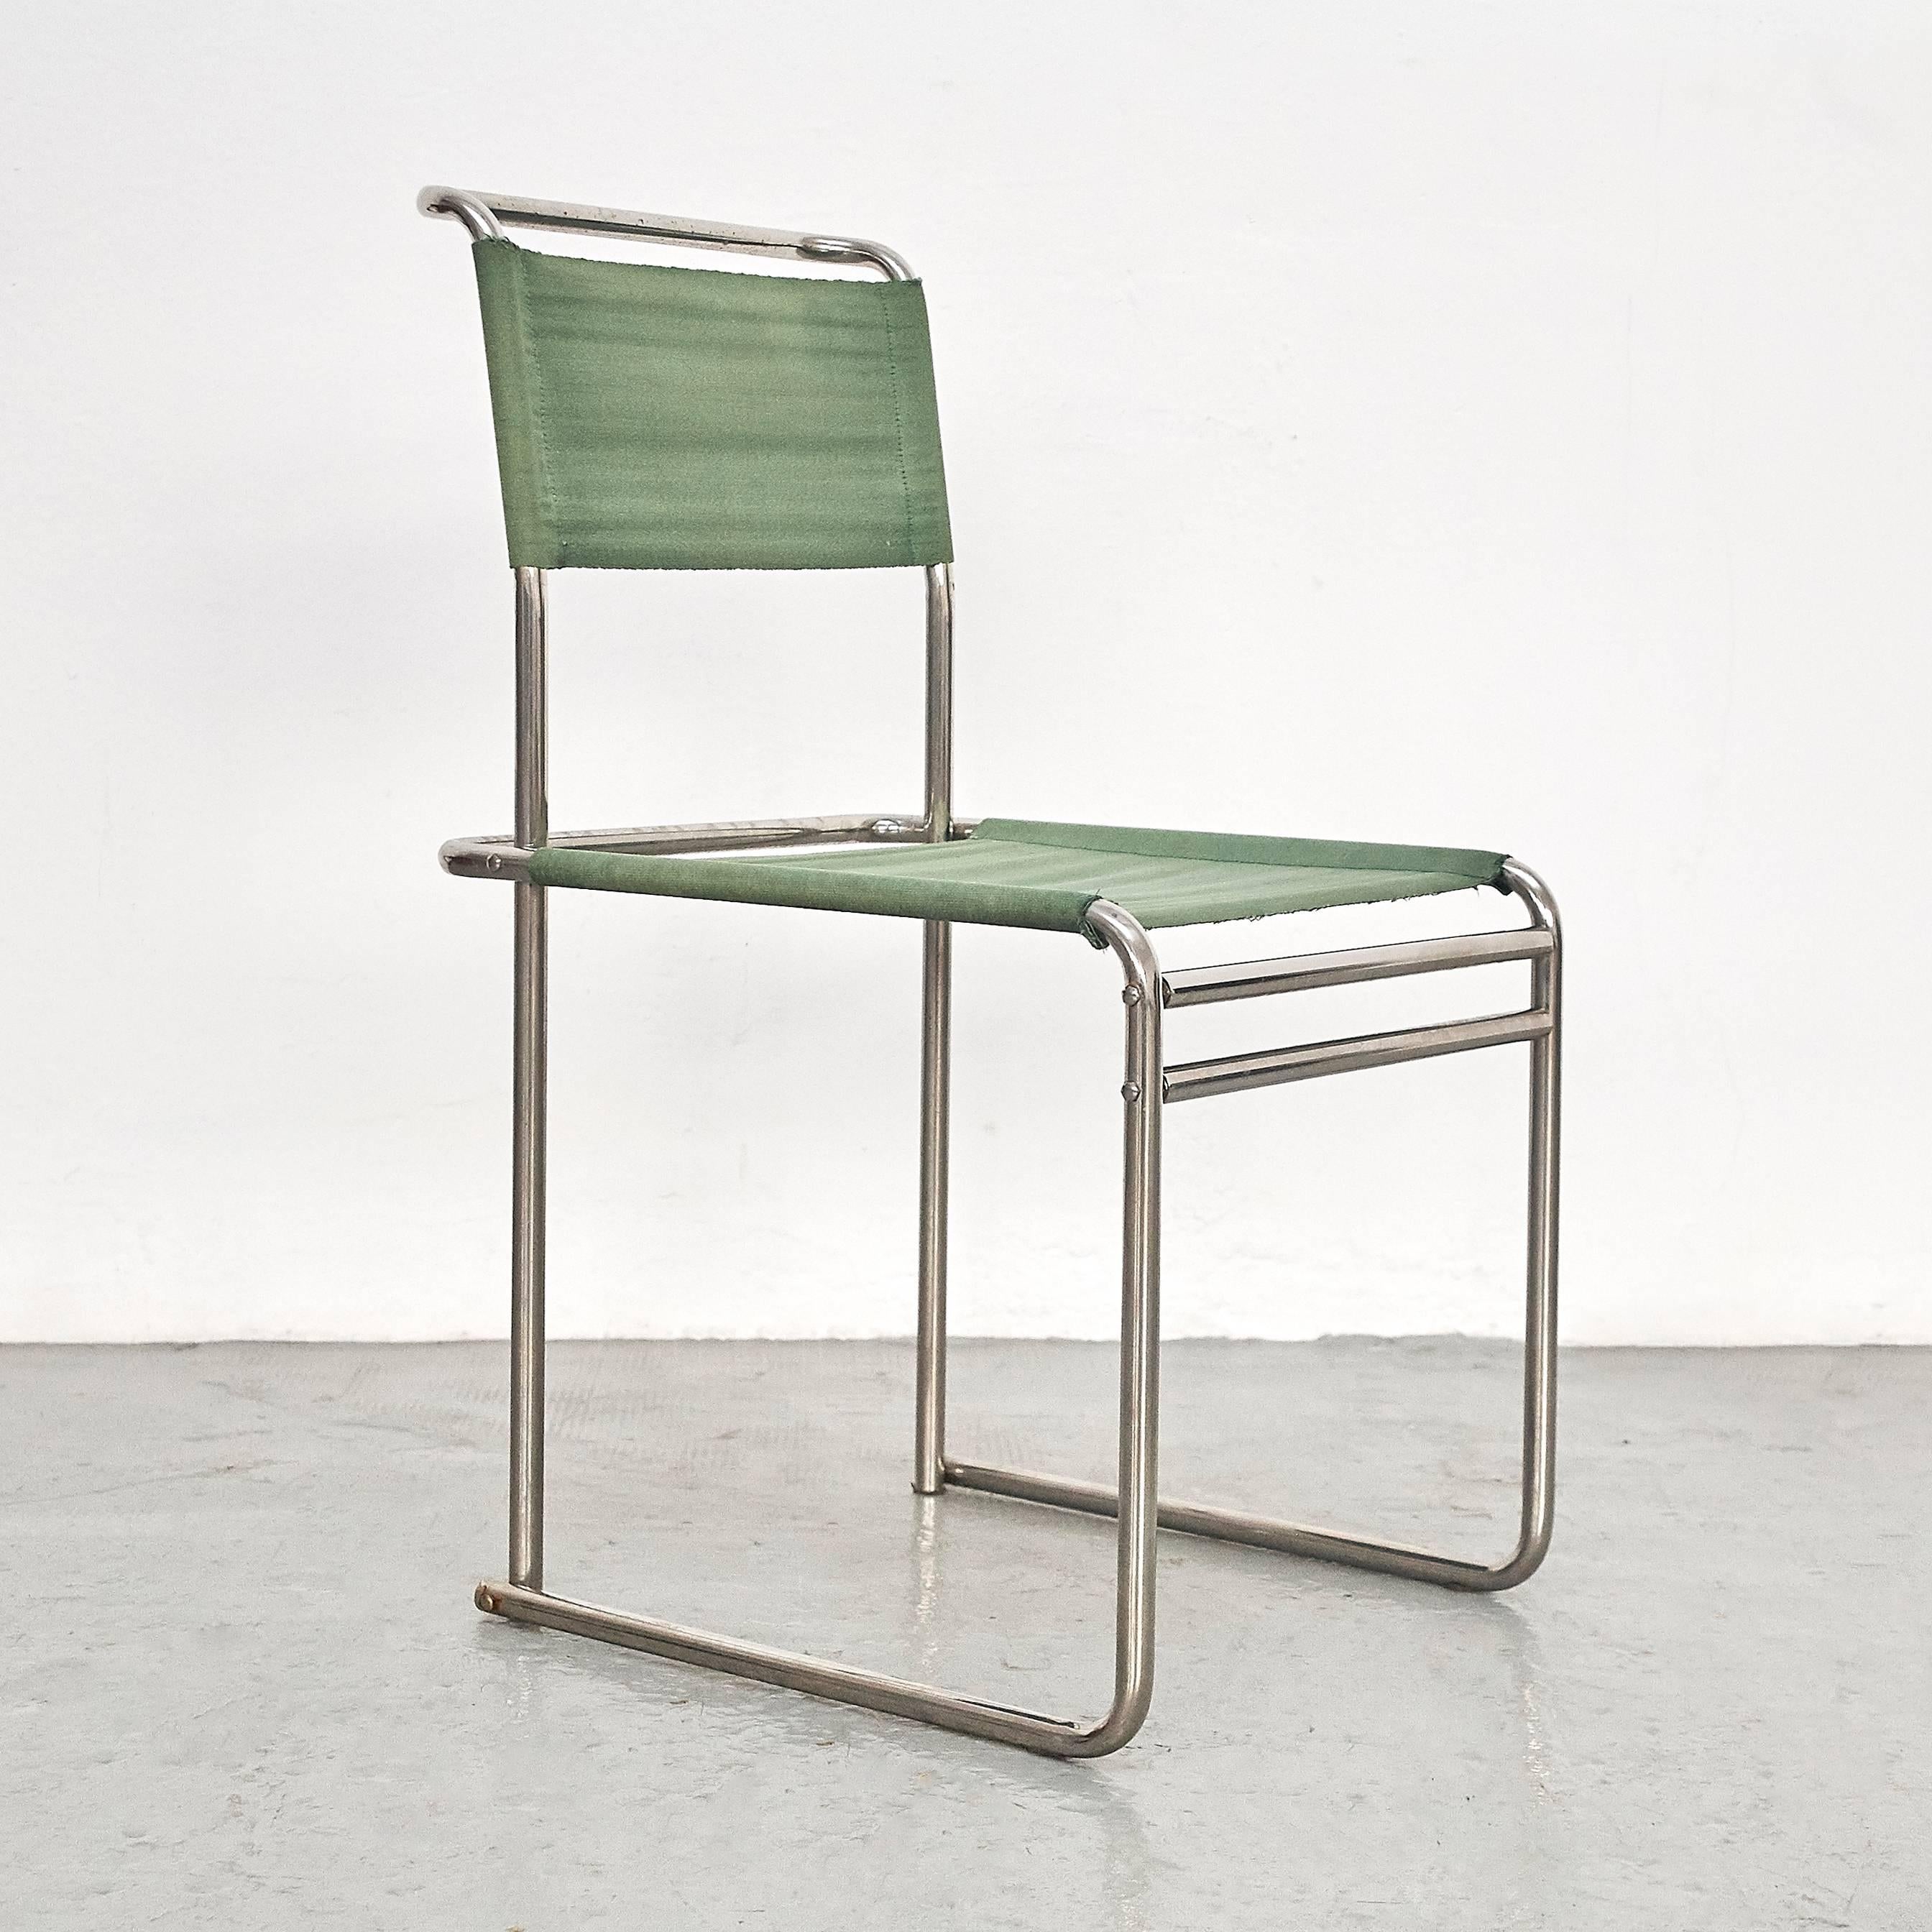 B5 chairs designed by Marcel Breuer, circa 1926.
Manufactured by Tecta, circa 1970.

Tubular steel, fabric.

In good original condition, with minor wear consistent with age and use, preserving a beautiful patina. 

Marcel Lajos Breuer